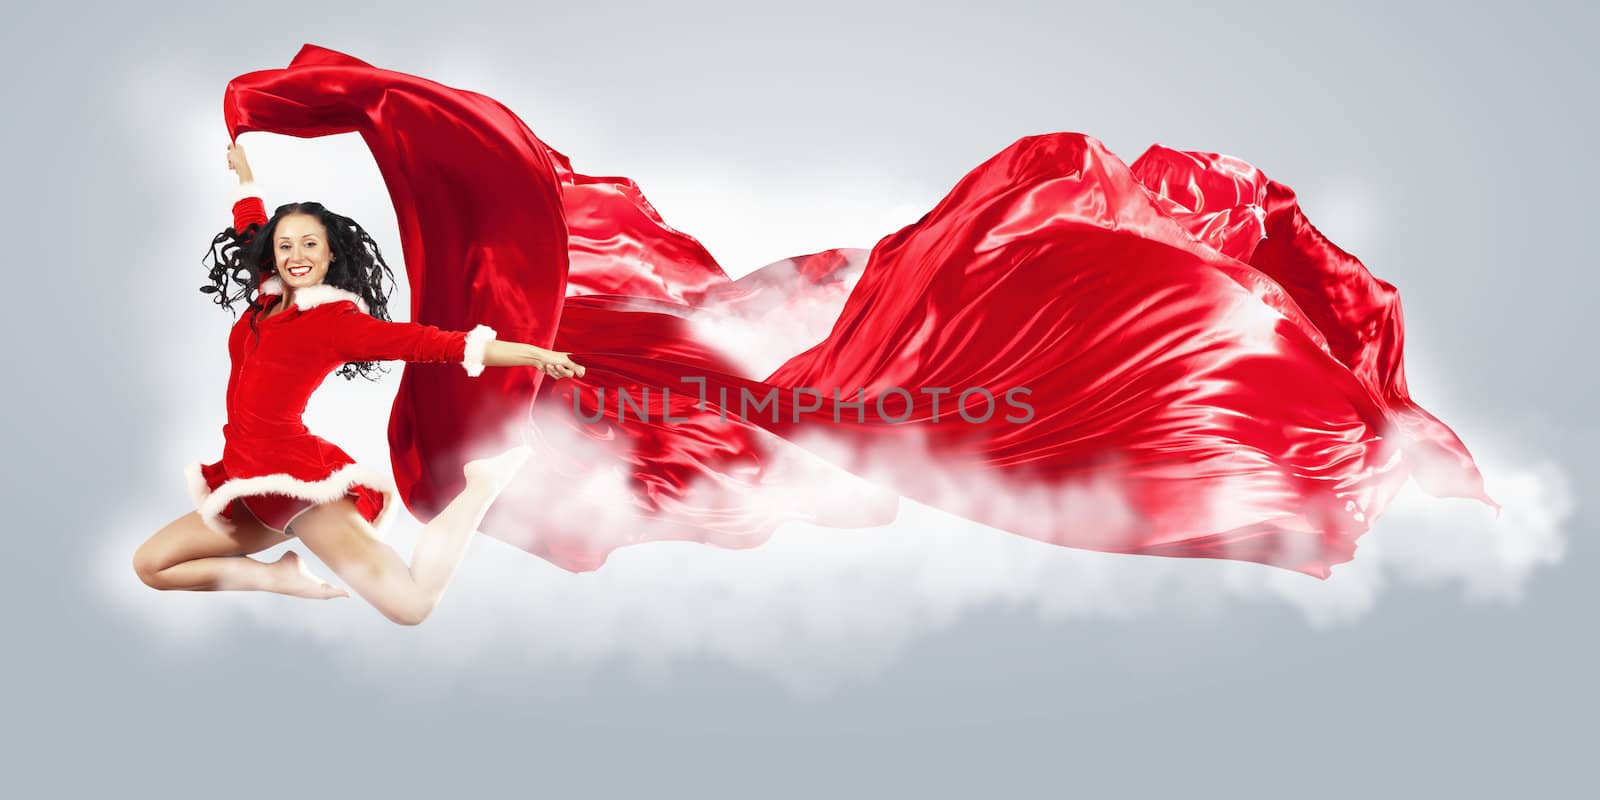 Happy smiling woman in red xmas costume jumping high